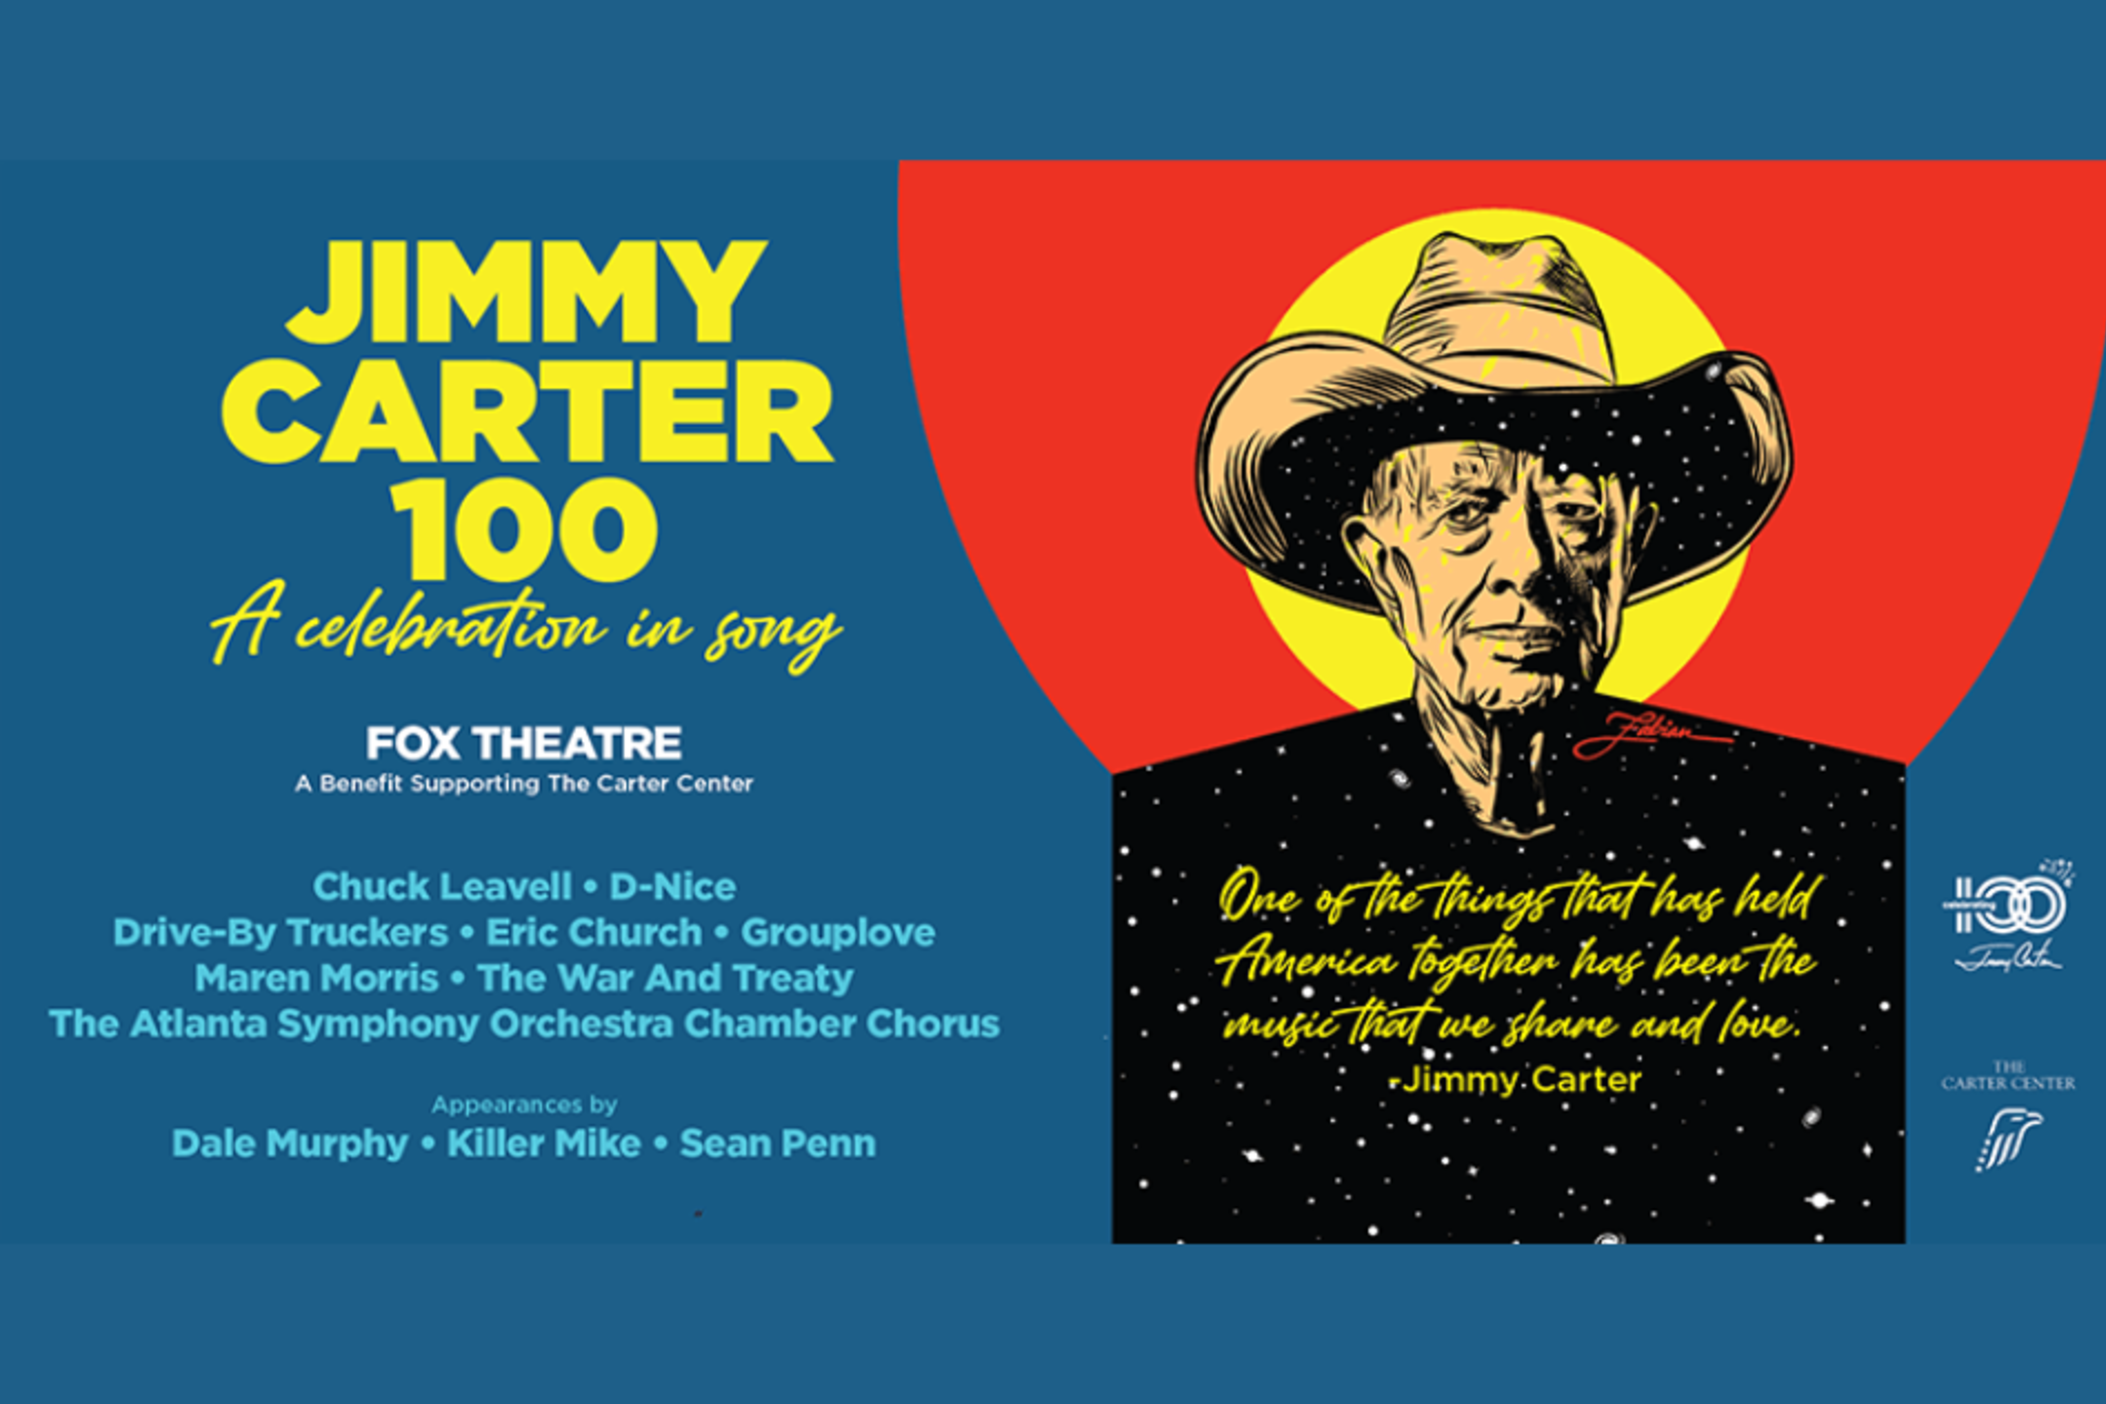 Oct. 1, 2024 is Jimmy Carter's 100th birthday. A concert featuring more than a dozens celebrities and musical acts will pay tribute to the former president at Atlanta's Fox Theatre on Sept. 17, 2024.